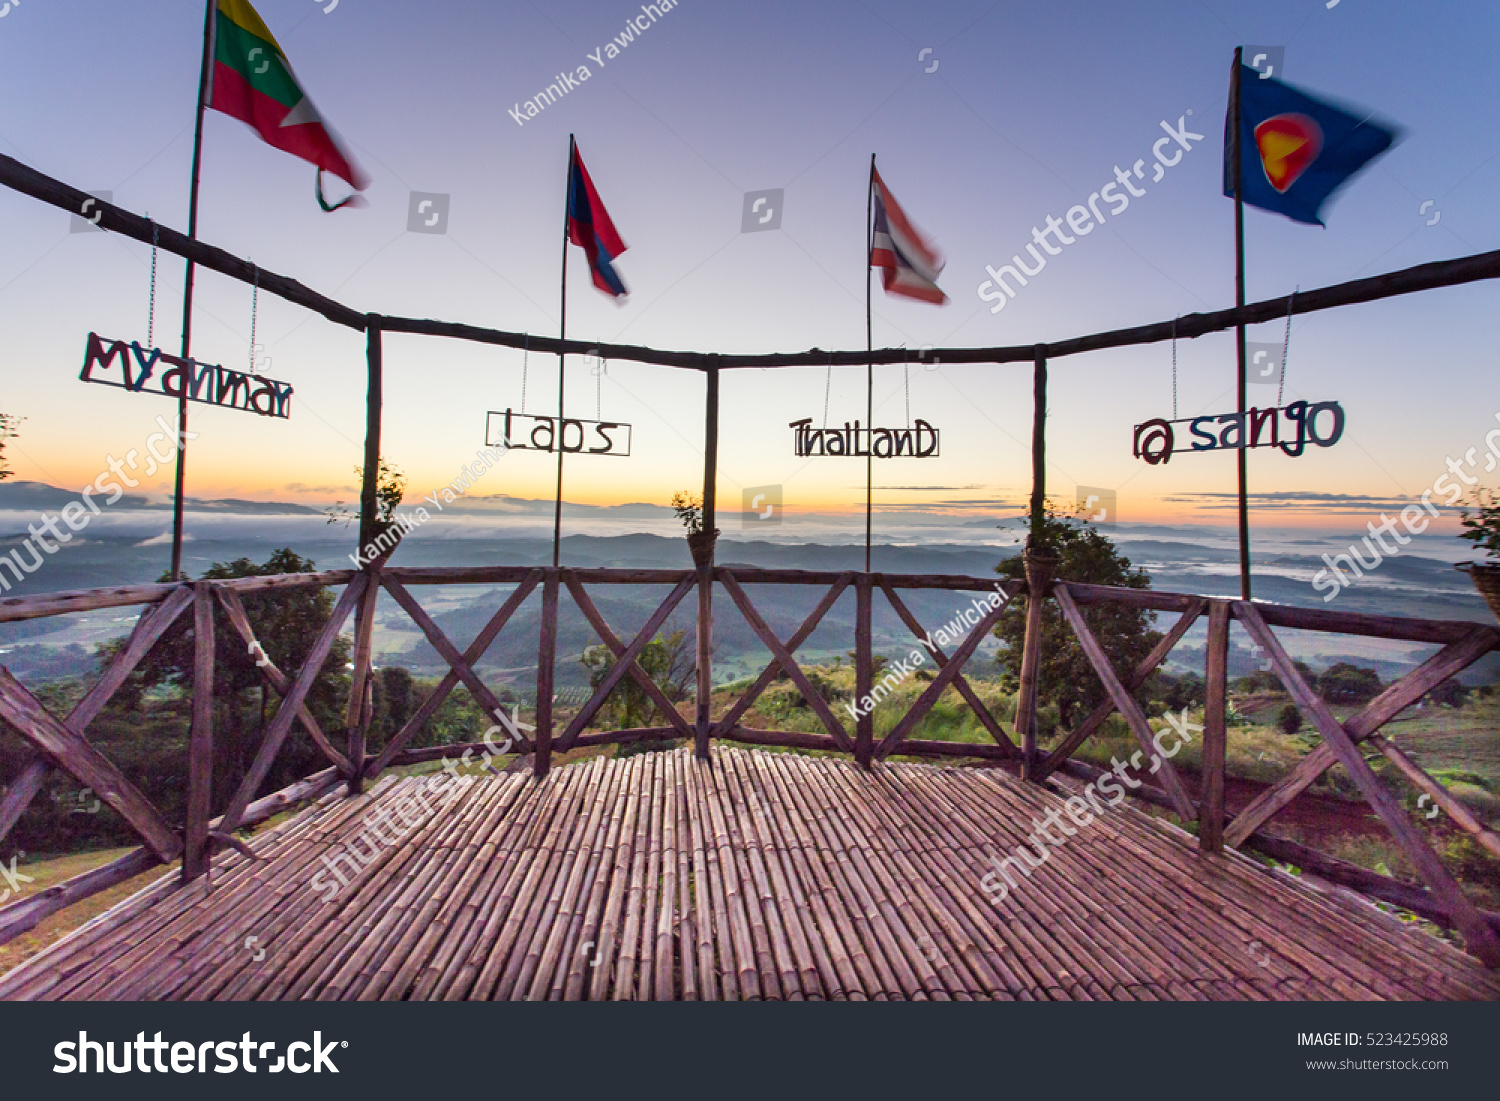 Flag of golden triangle country about Thailand, Laos, Myanmar at the viewpoint of the Golden Triangle at the intersection of the three countries;Thailand, Myanmar, Laos  #523425988